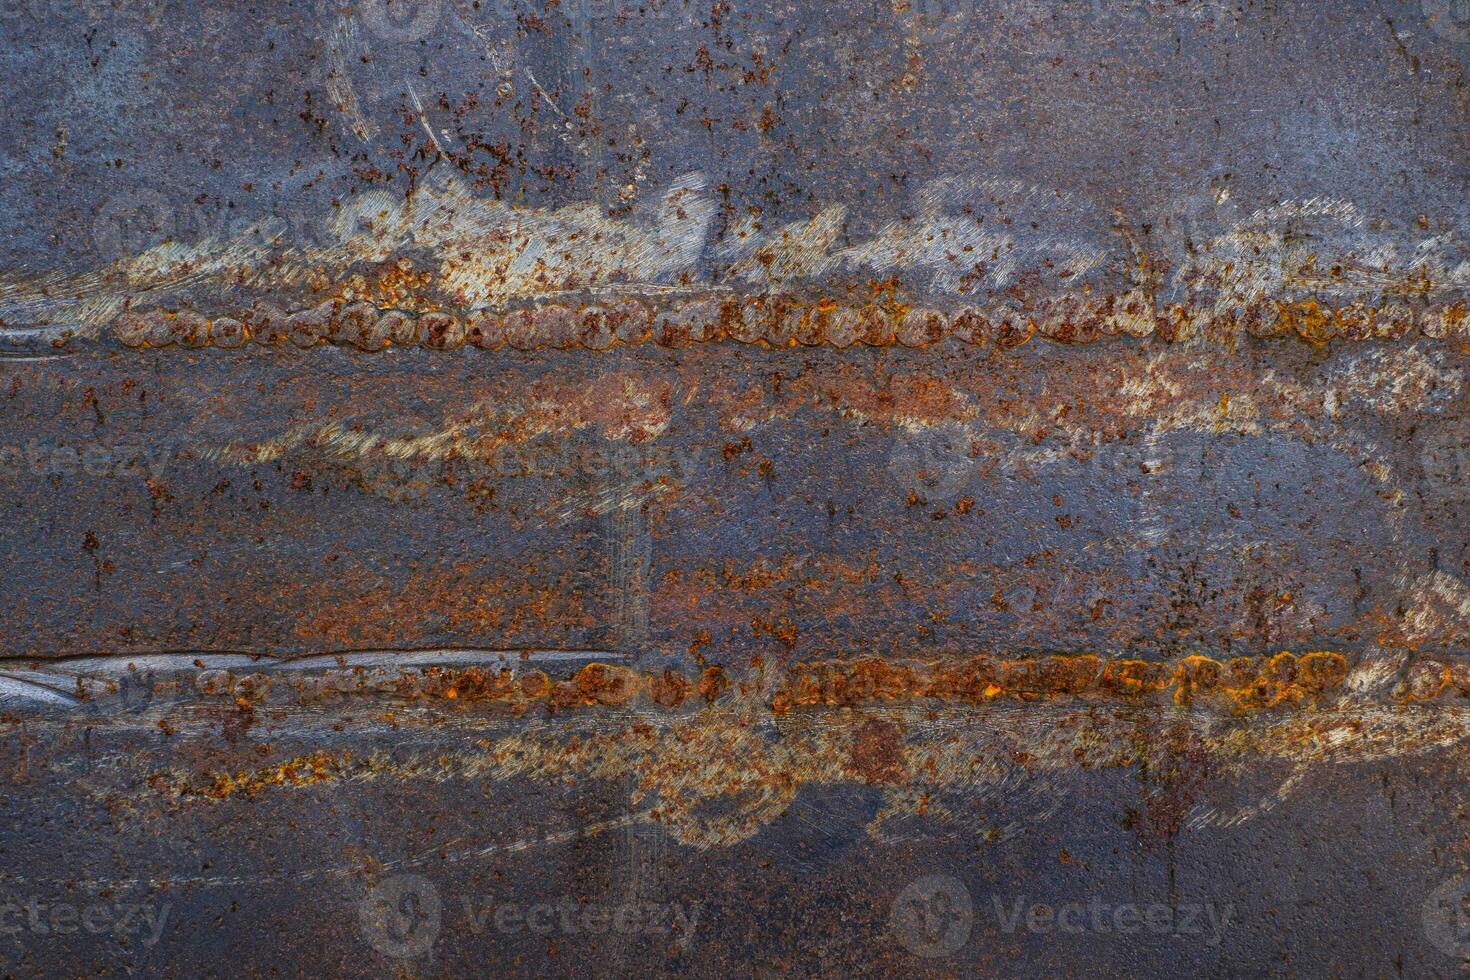 Rust on the surface of the old iron sheet photo